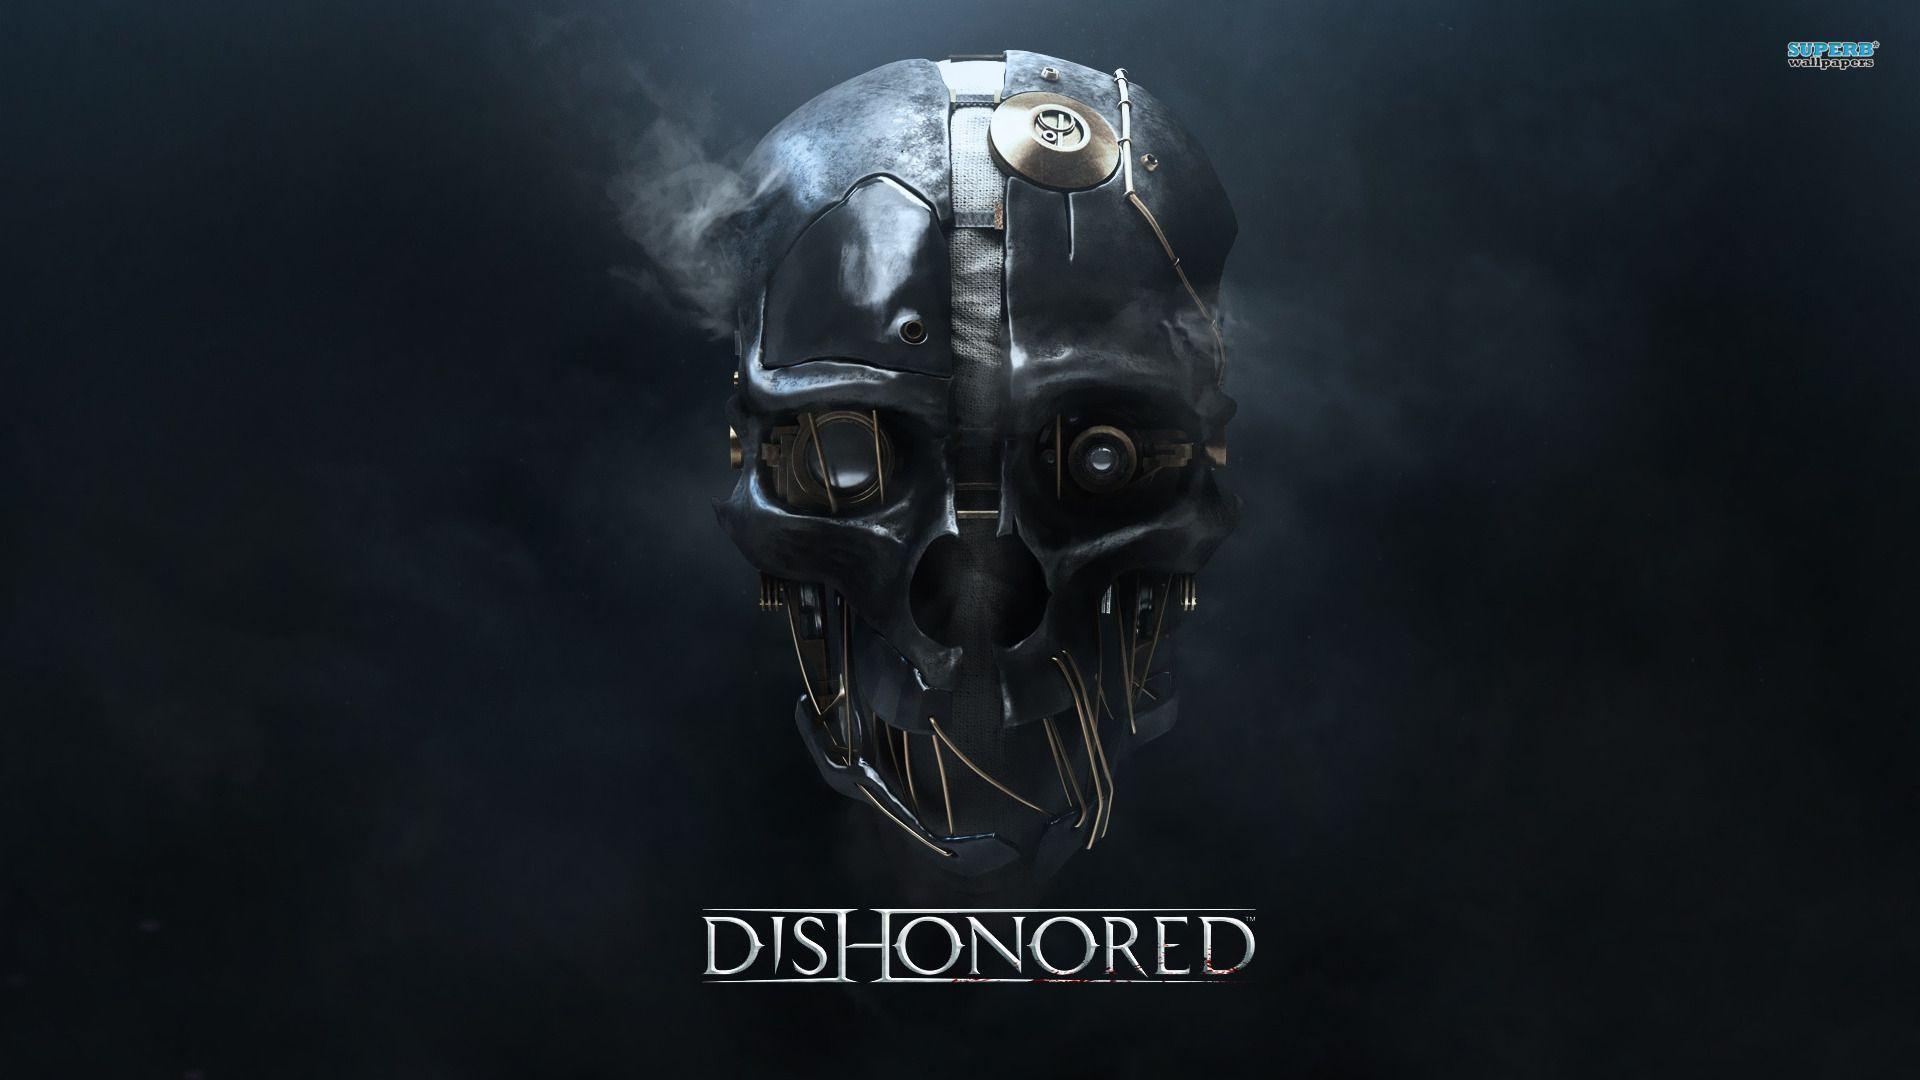 Dishonored Wallpaper 1080p